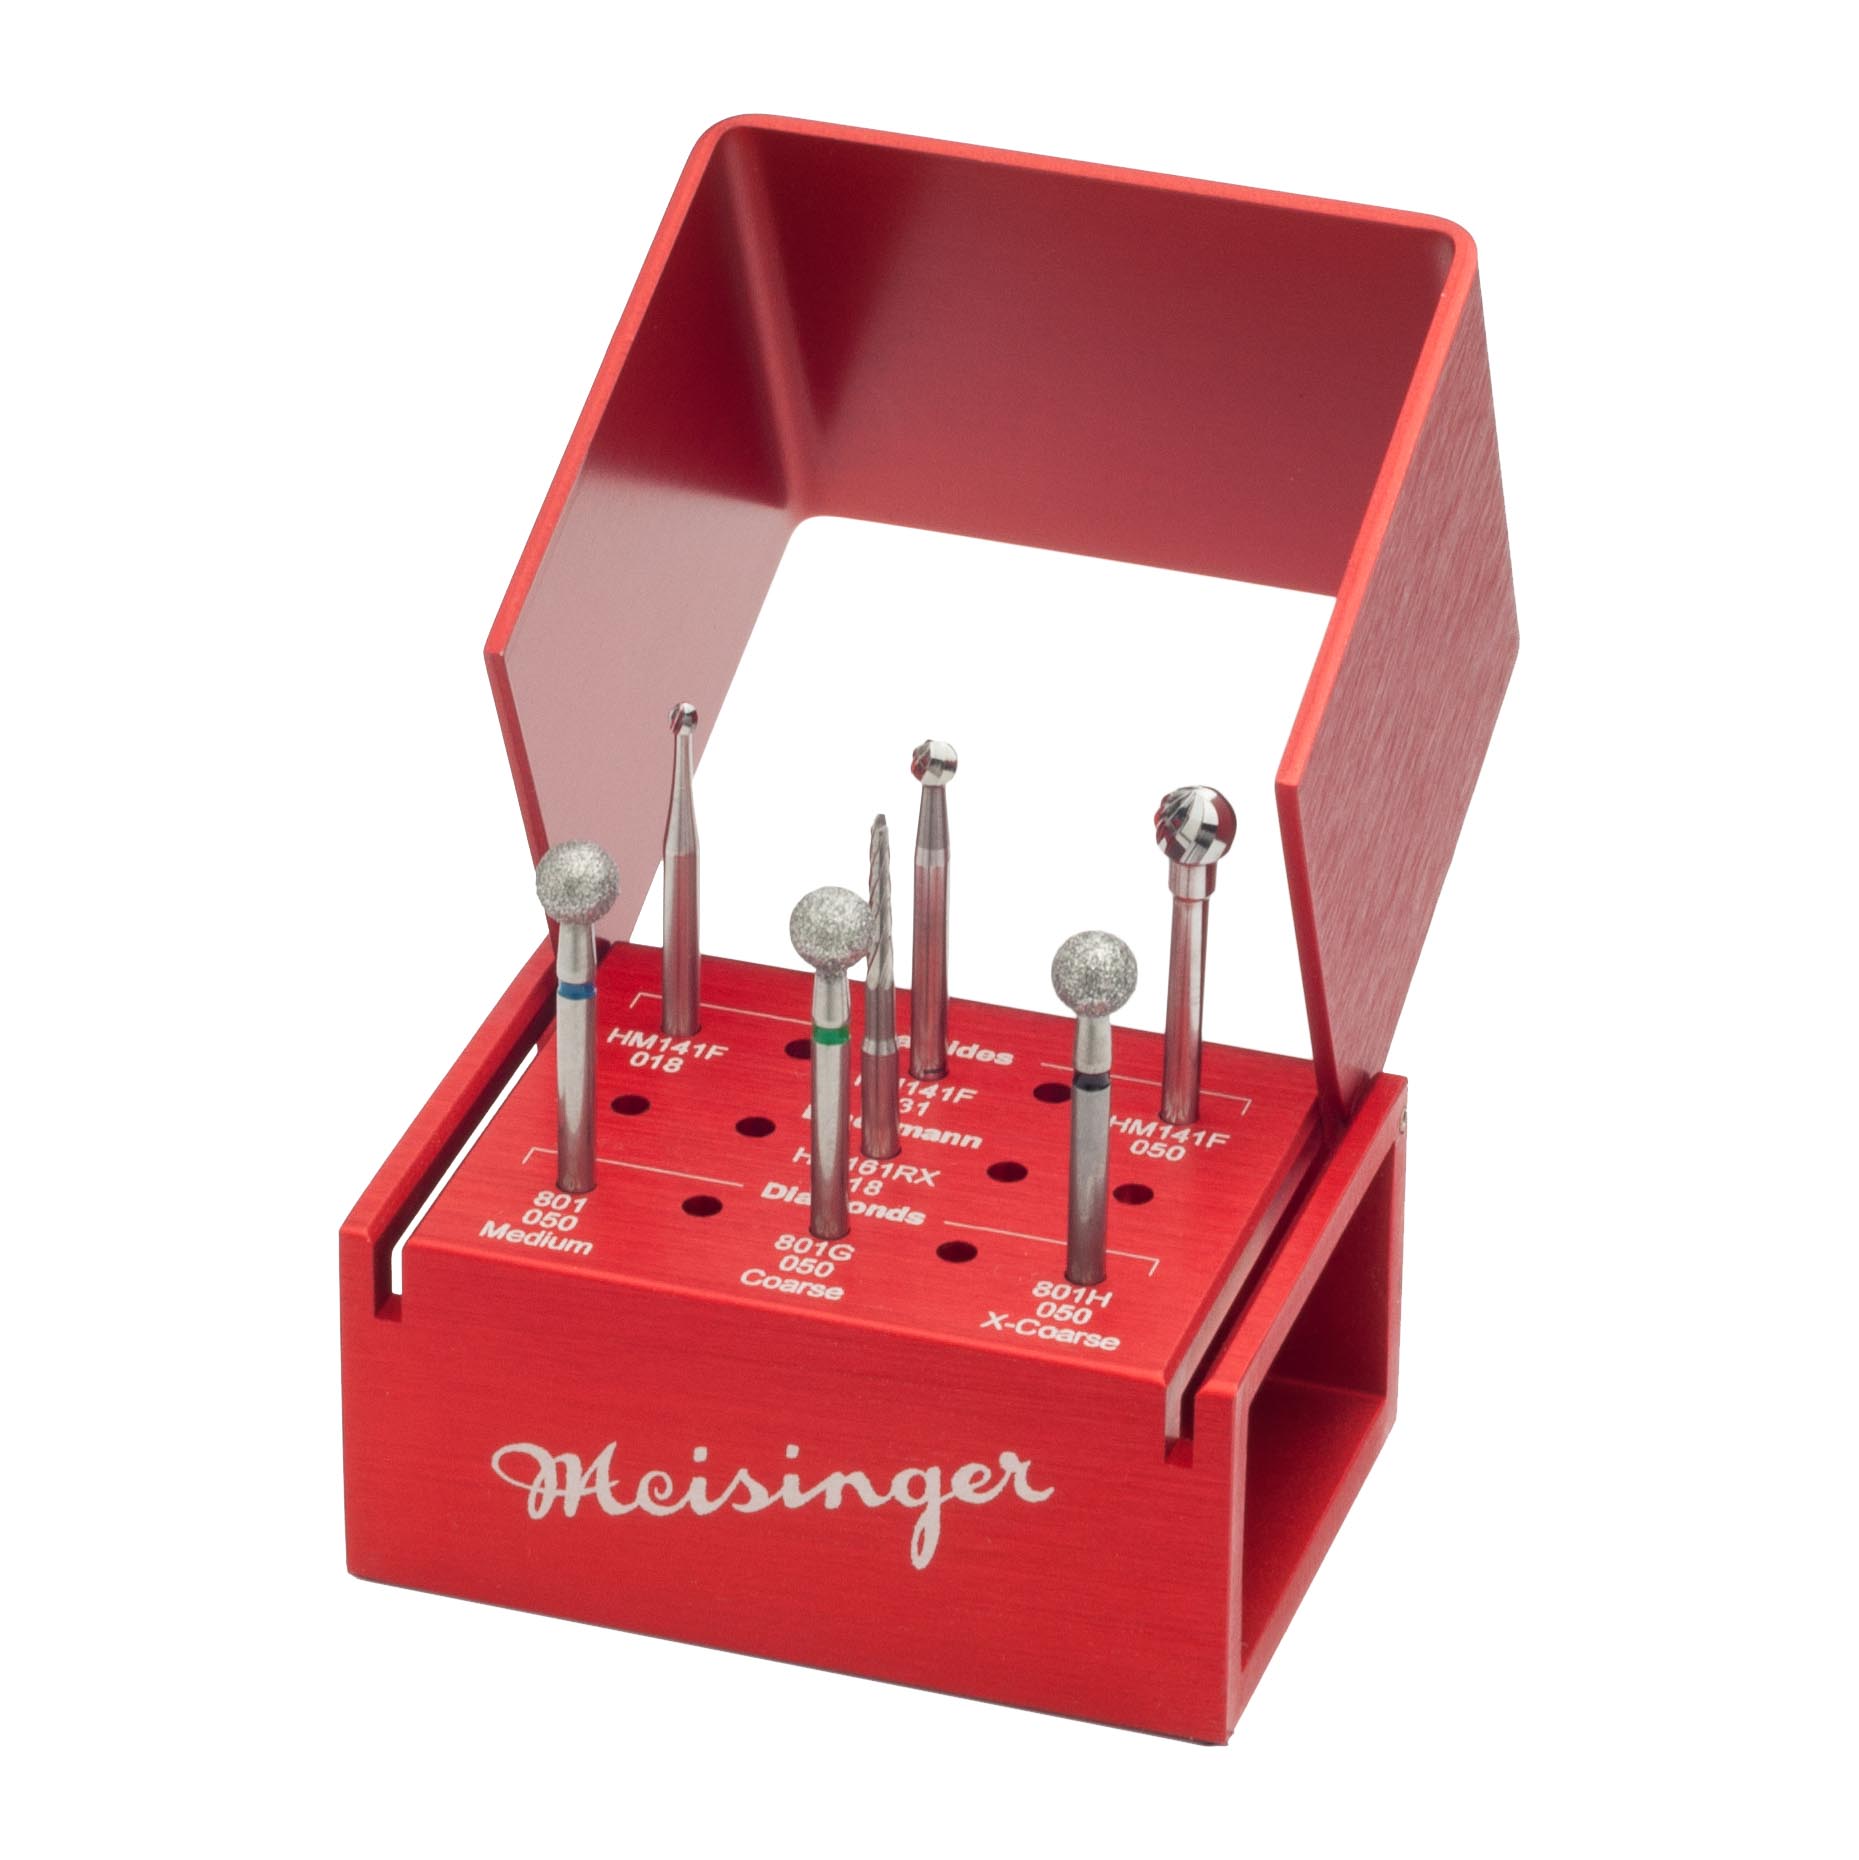 BSKSL Surgical Kit 1, Lateral Approach for External Sinus Elevation